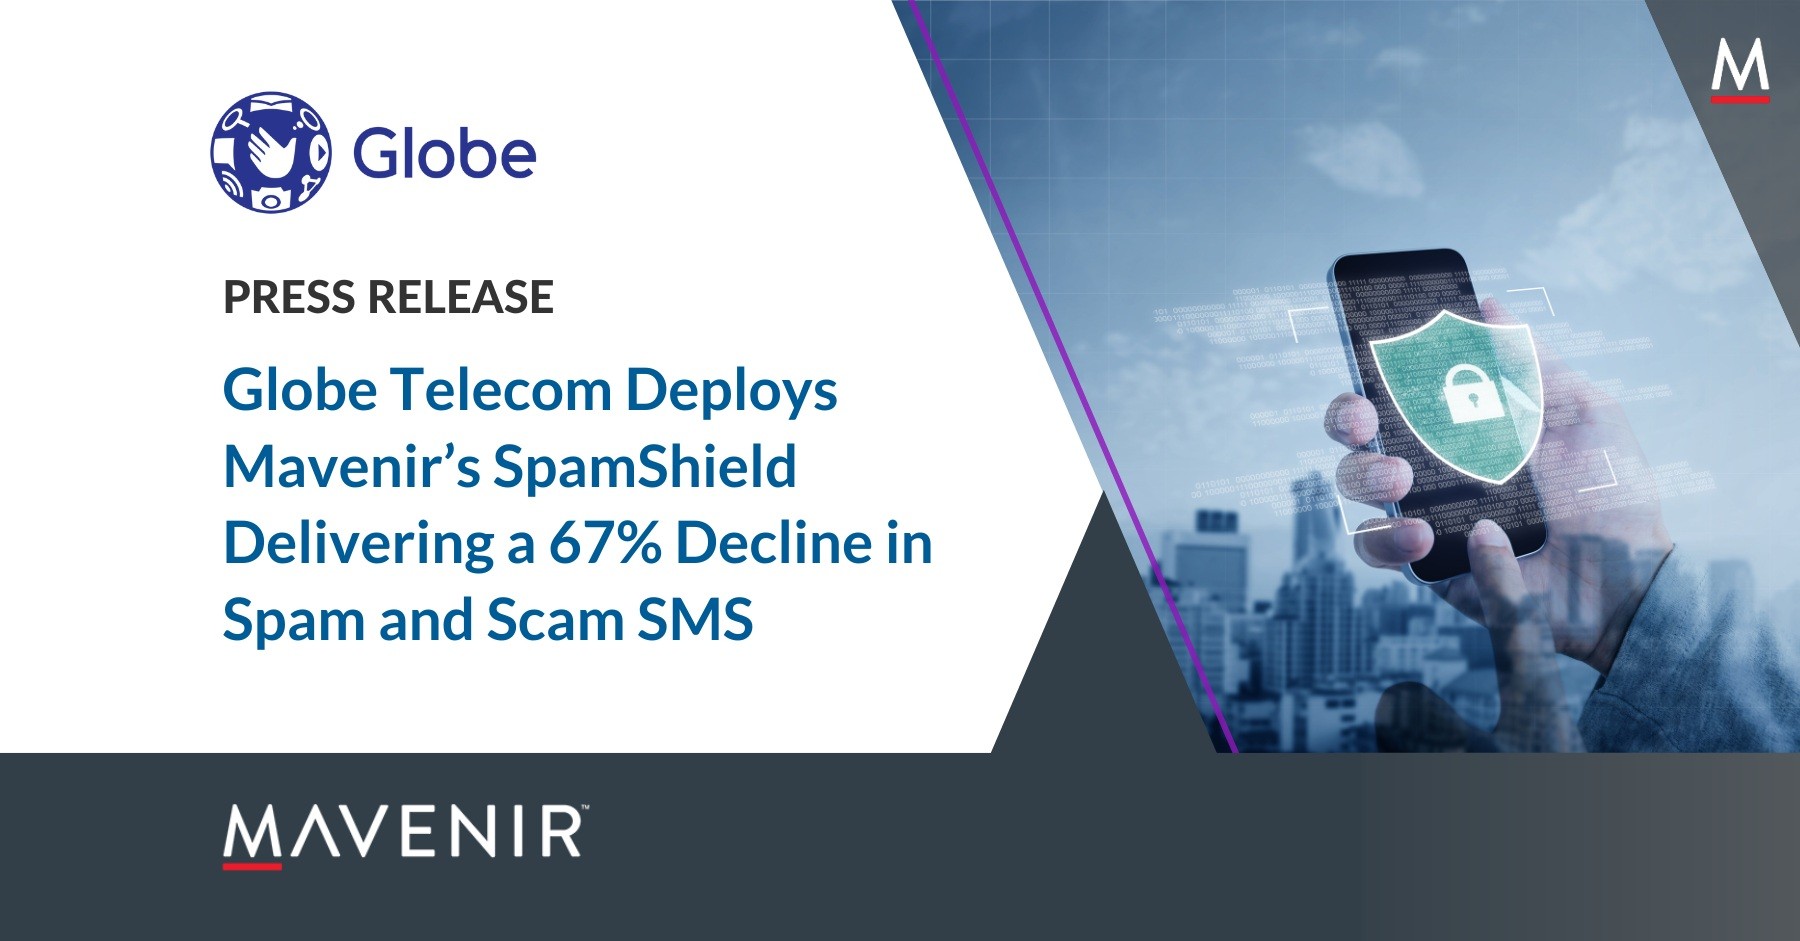 Mavenir’s SpamShield Messaging Technology Drives Steep Decline in Spam and Scam SMS for Globe Telecom